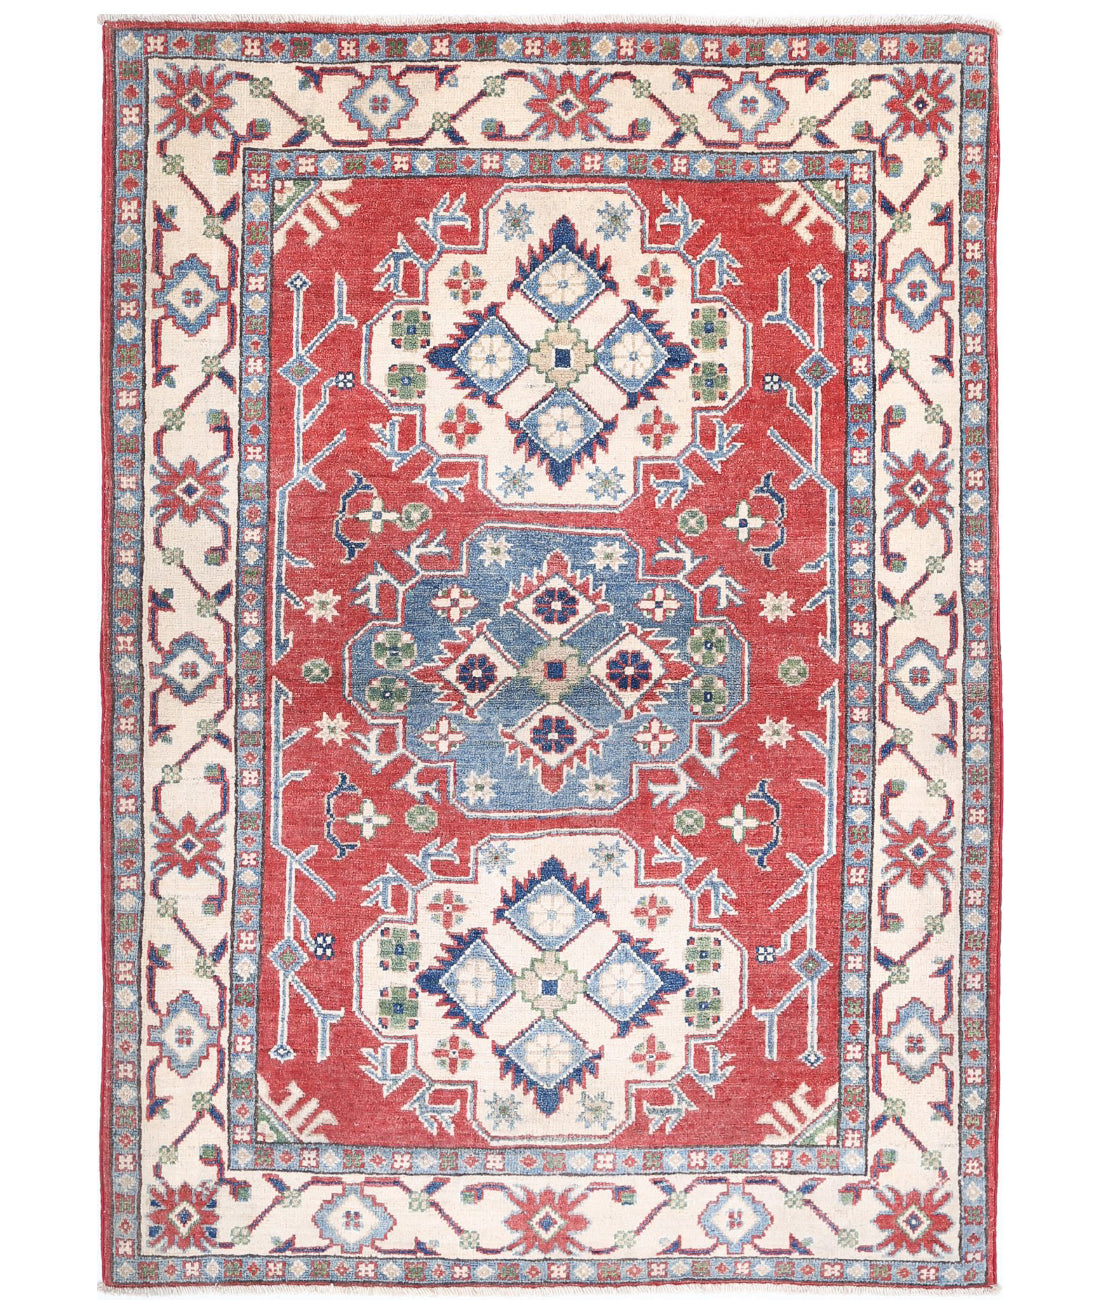 Hand Knotted Tribal Kazak Wool Rug - 3'6'' x 4'11'' 3'6'' x 4'11'' (105 X 148) / Red / Ivory